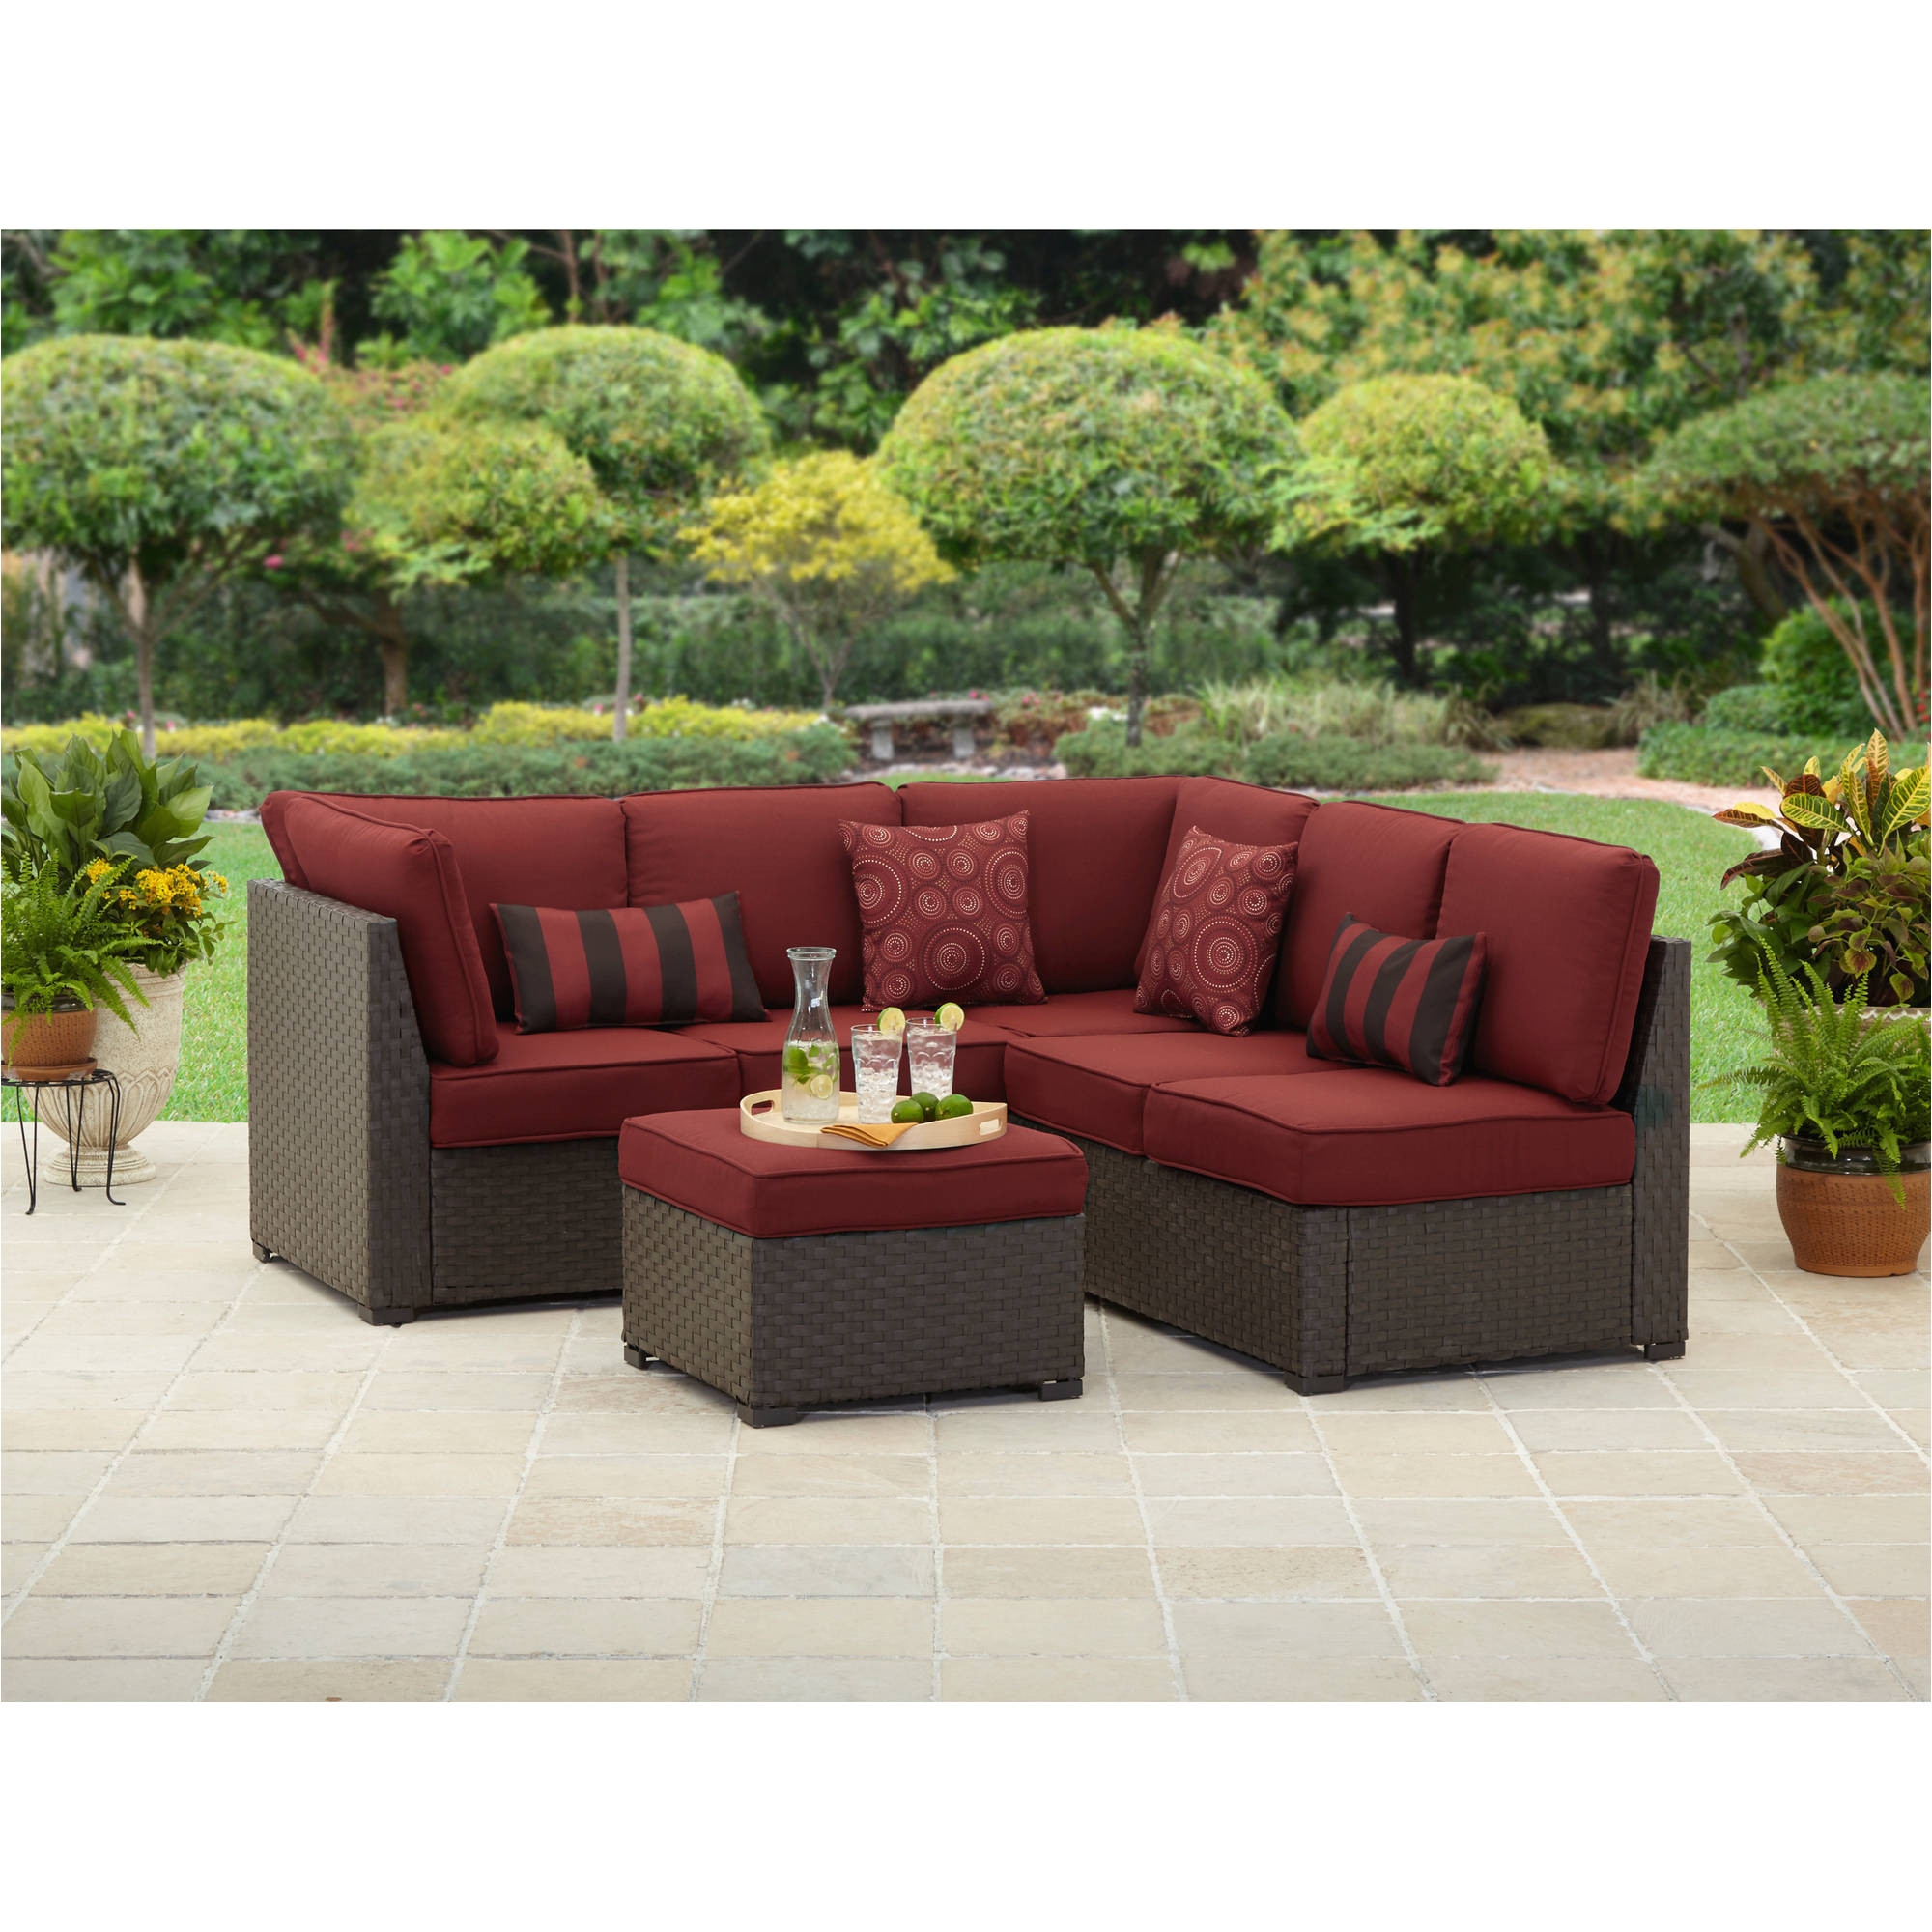 Furniture Stores In Milwaukee Patio Coral Chair Luxury Unique Wicker Outdoor sofa 0d Patio Concept